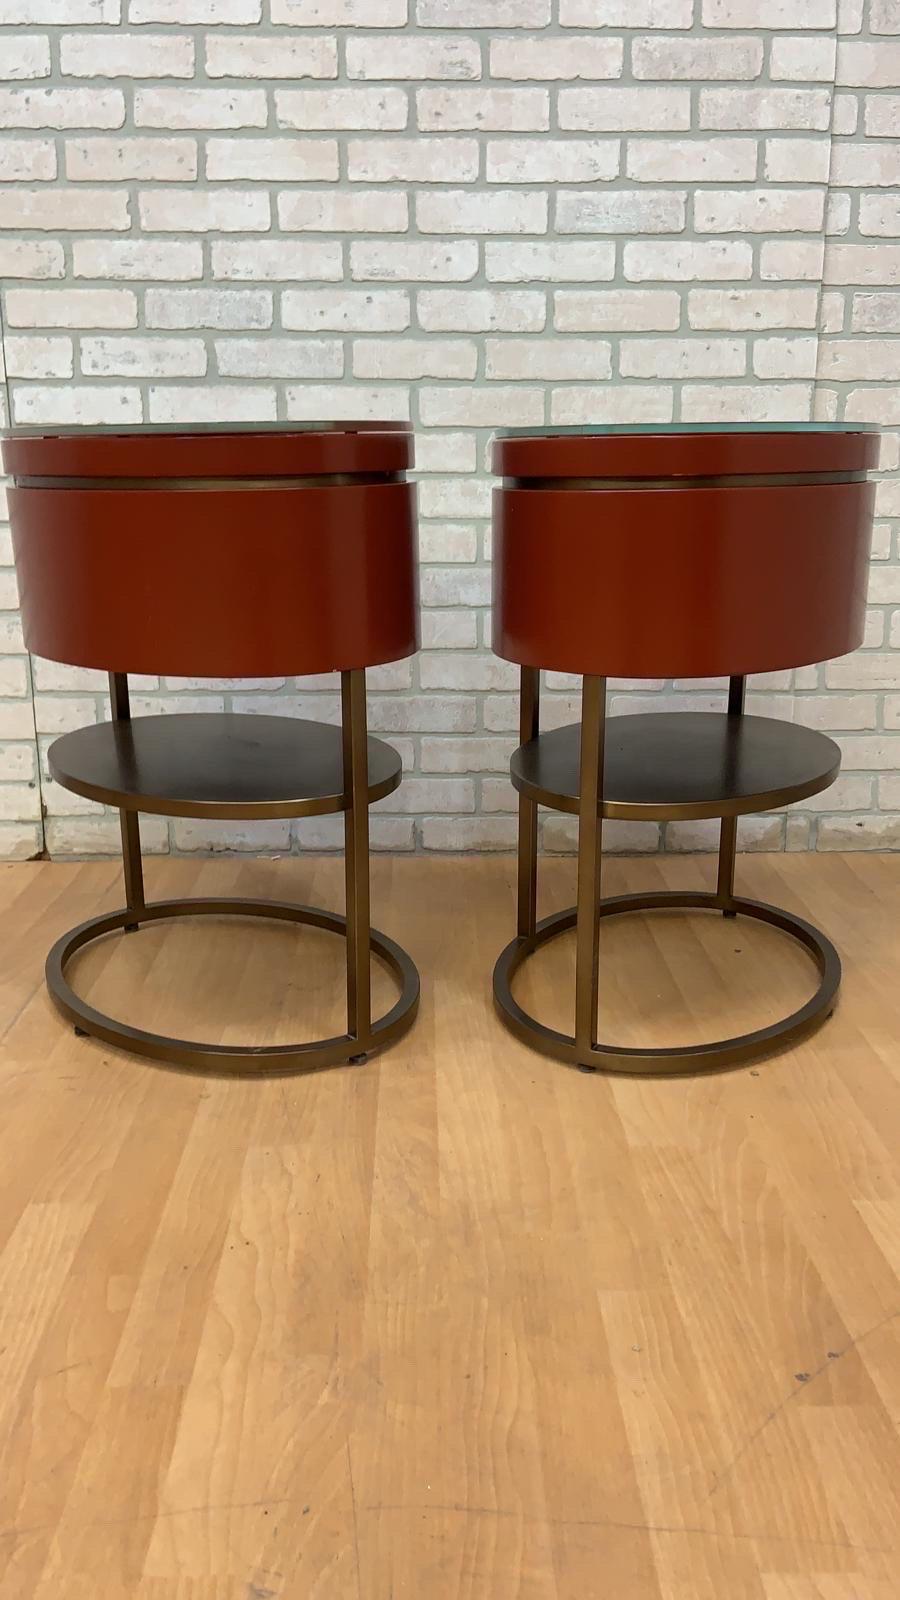 Vintage Contemporary Custom Designed Oval Side Table/Night-Stands - Pair In Good Condition For Sale In Chicago, IL